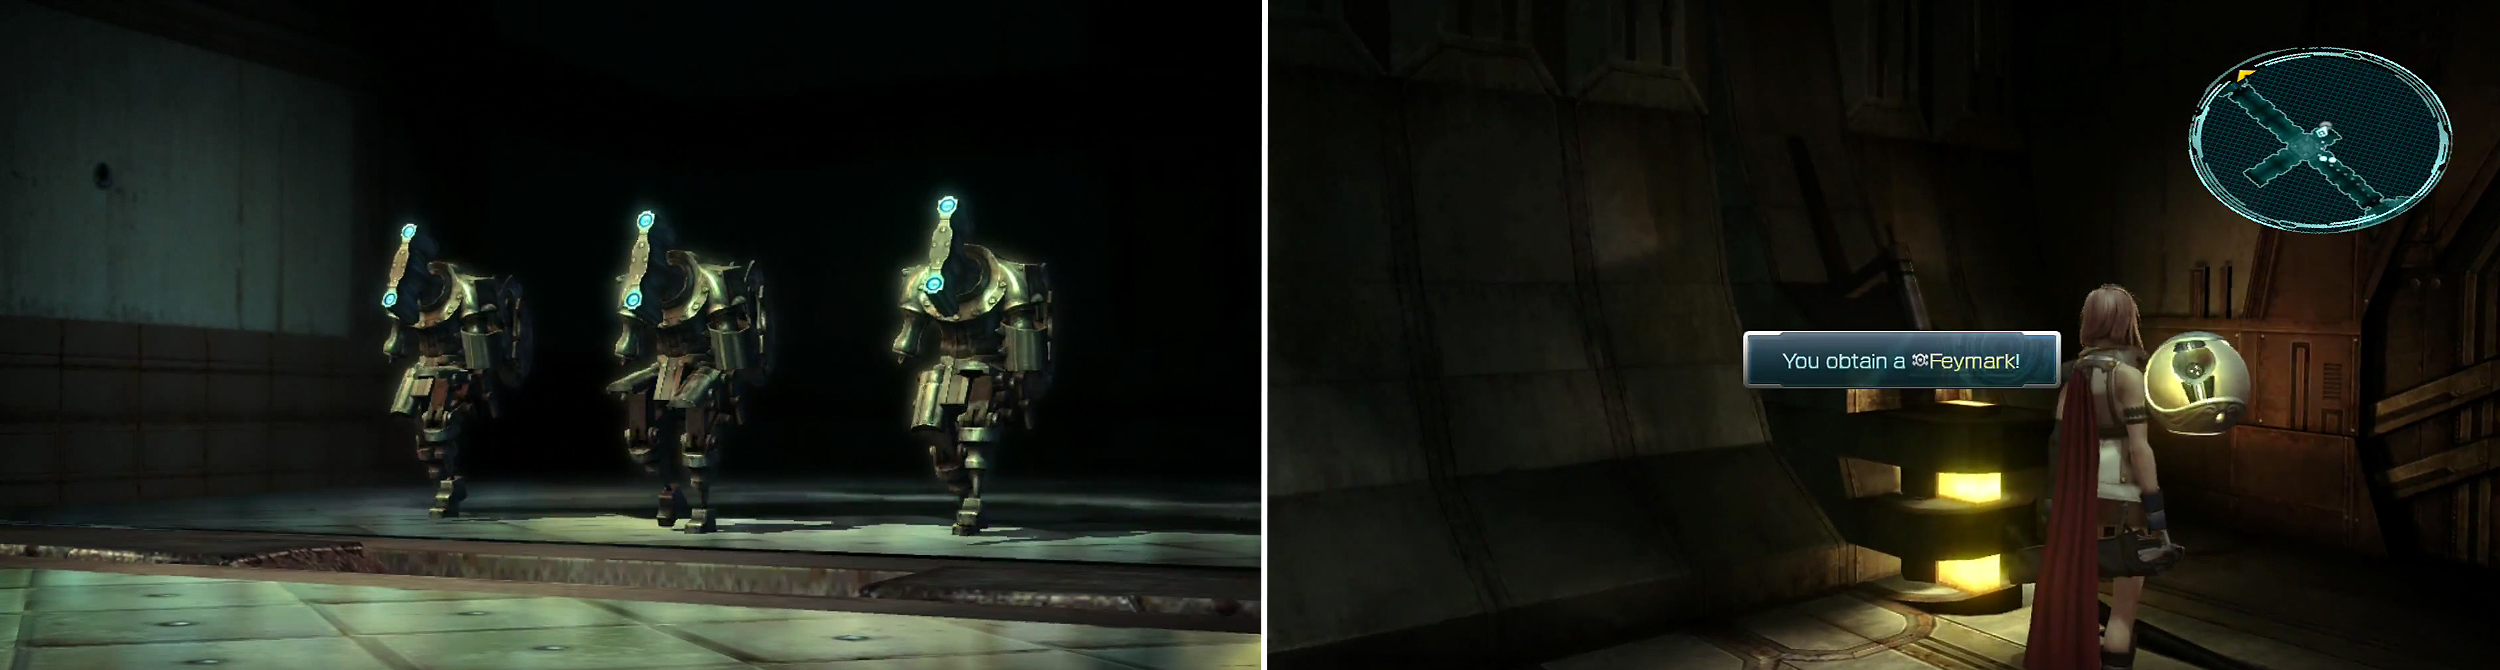 Enemies will be released from doors at the sides of the room (left). Later, you can find Snow’s Feymark weapon (right).